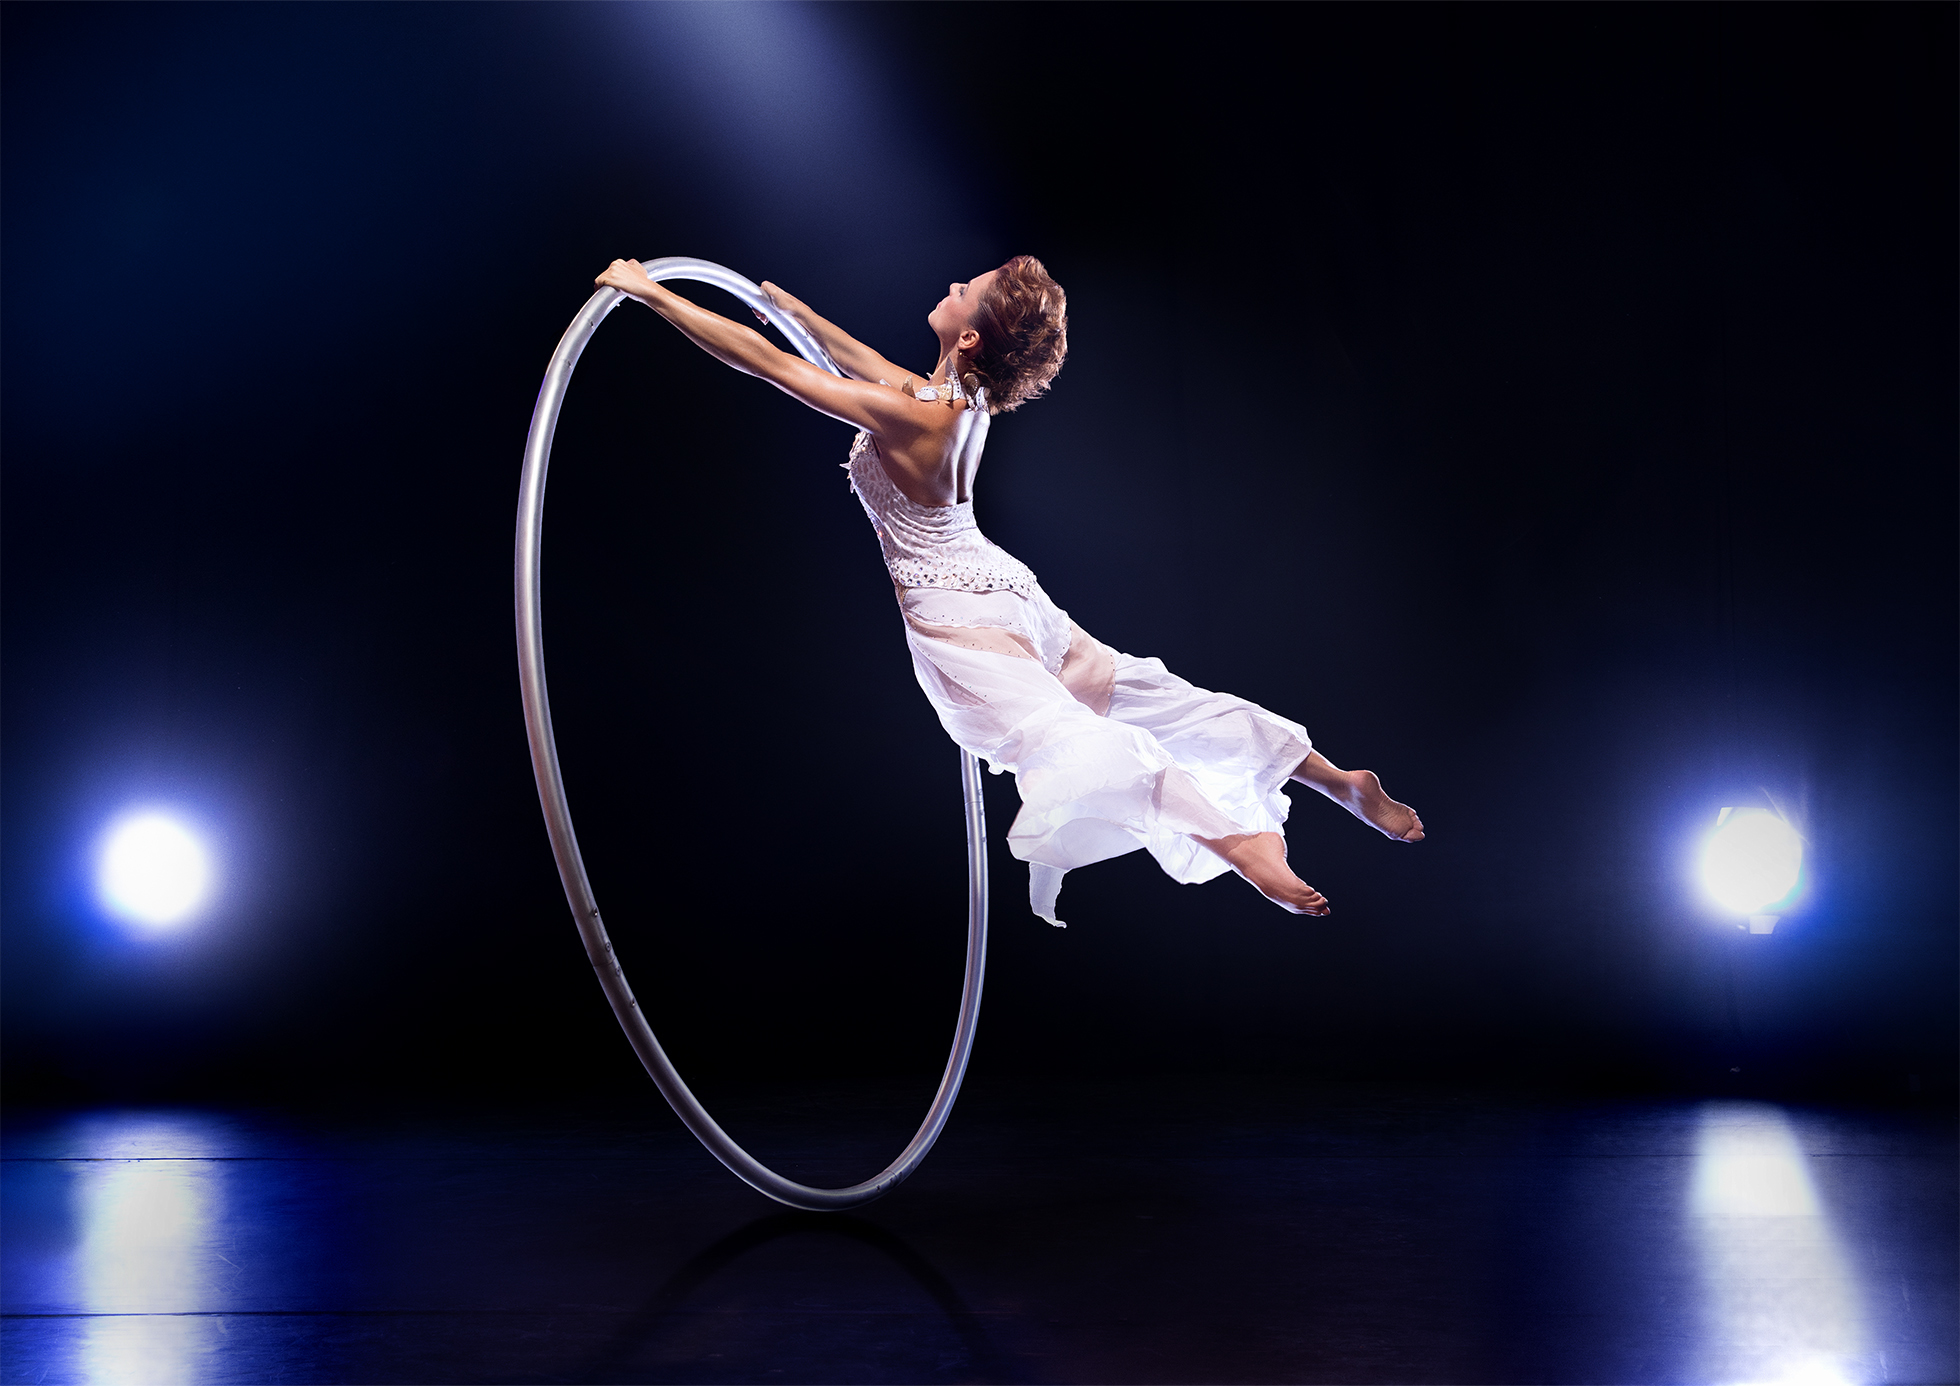 Valerie Inertie is a Cyr wheel artist, aerialist and circus choreographer who’s done social circus projects in Burkina Faso, Brazil and Haiti. Courtesy photo